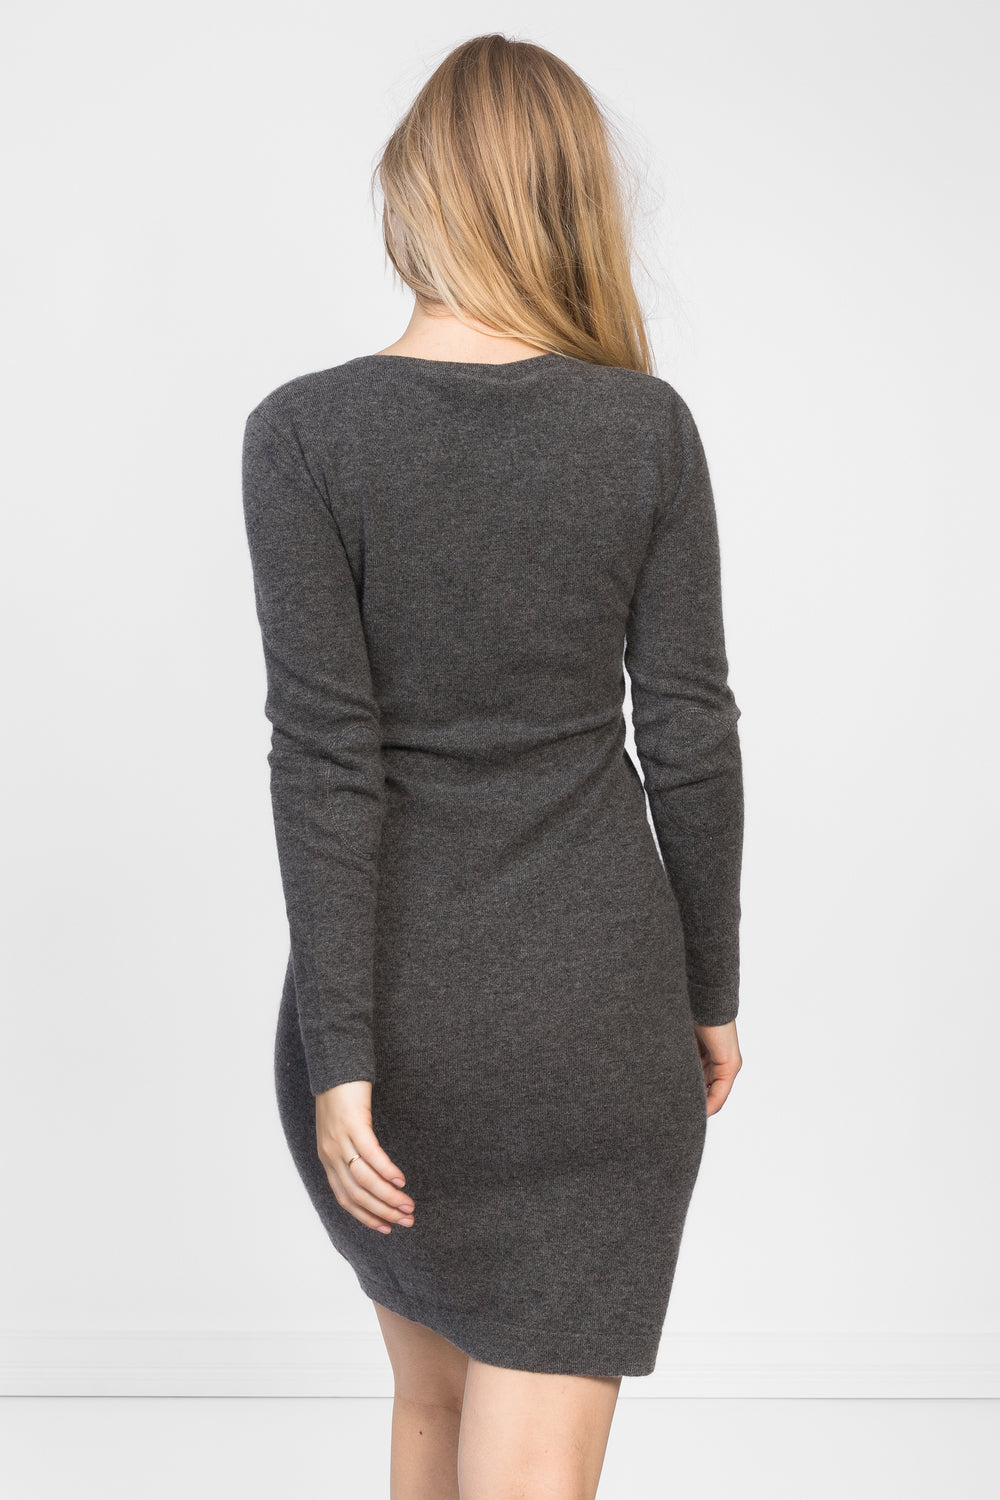 Cashmere dress from Kashmina in 100% cashmere